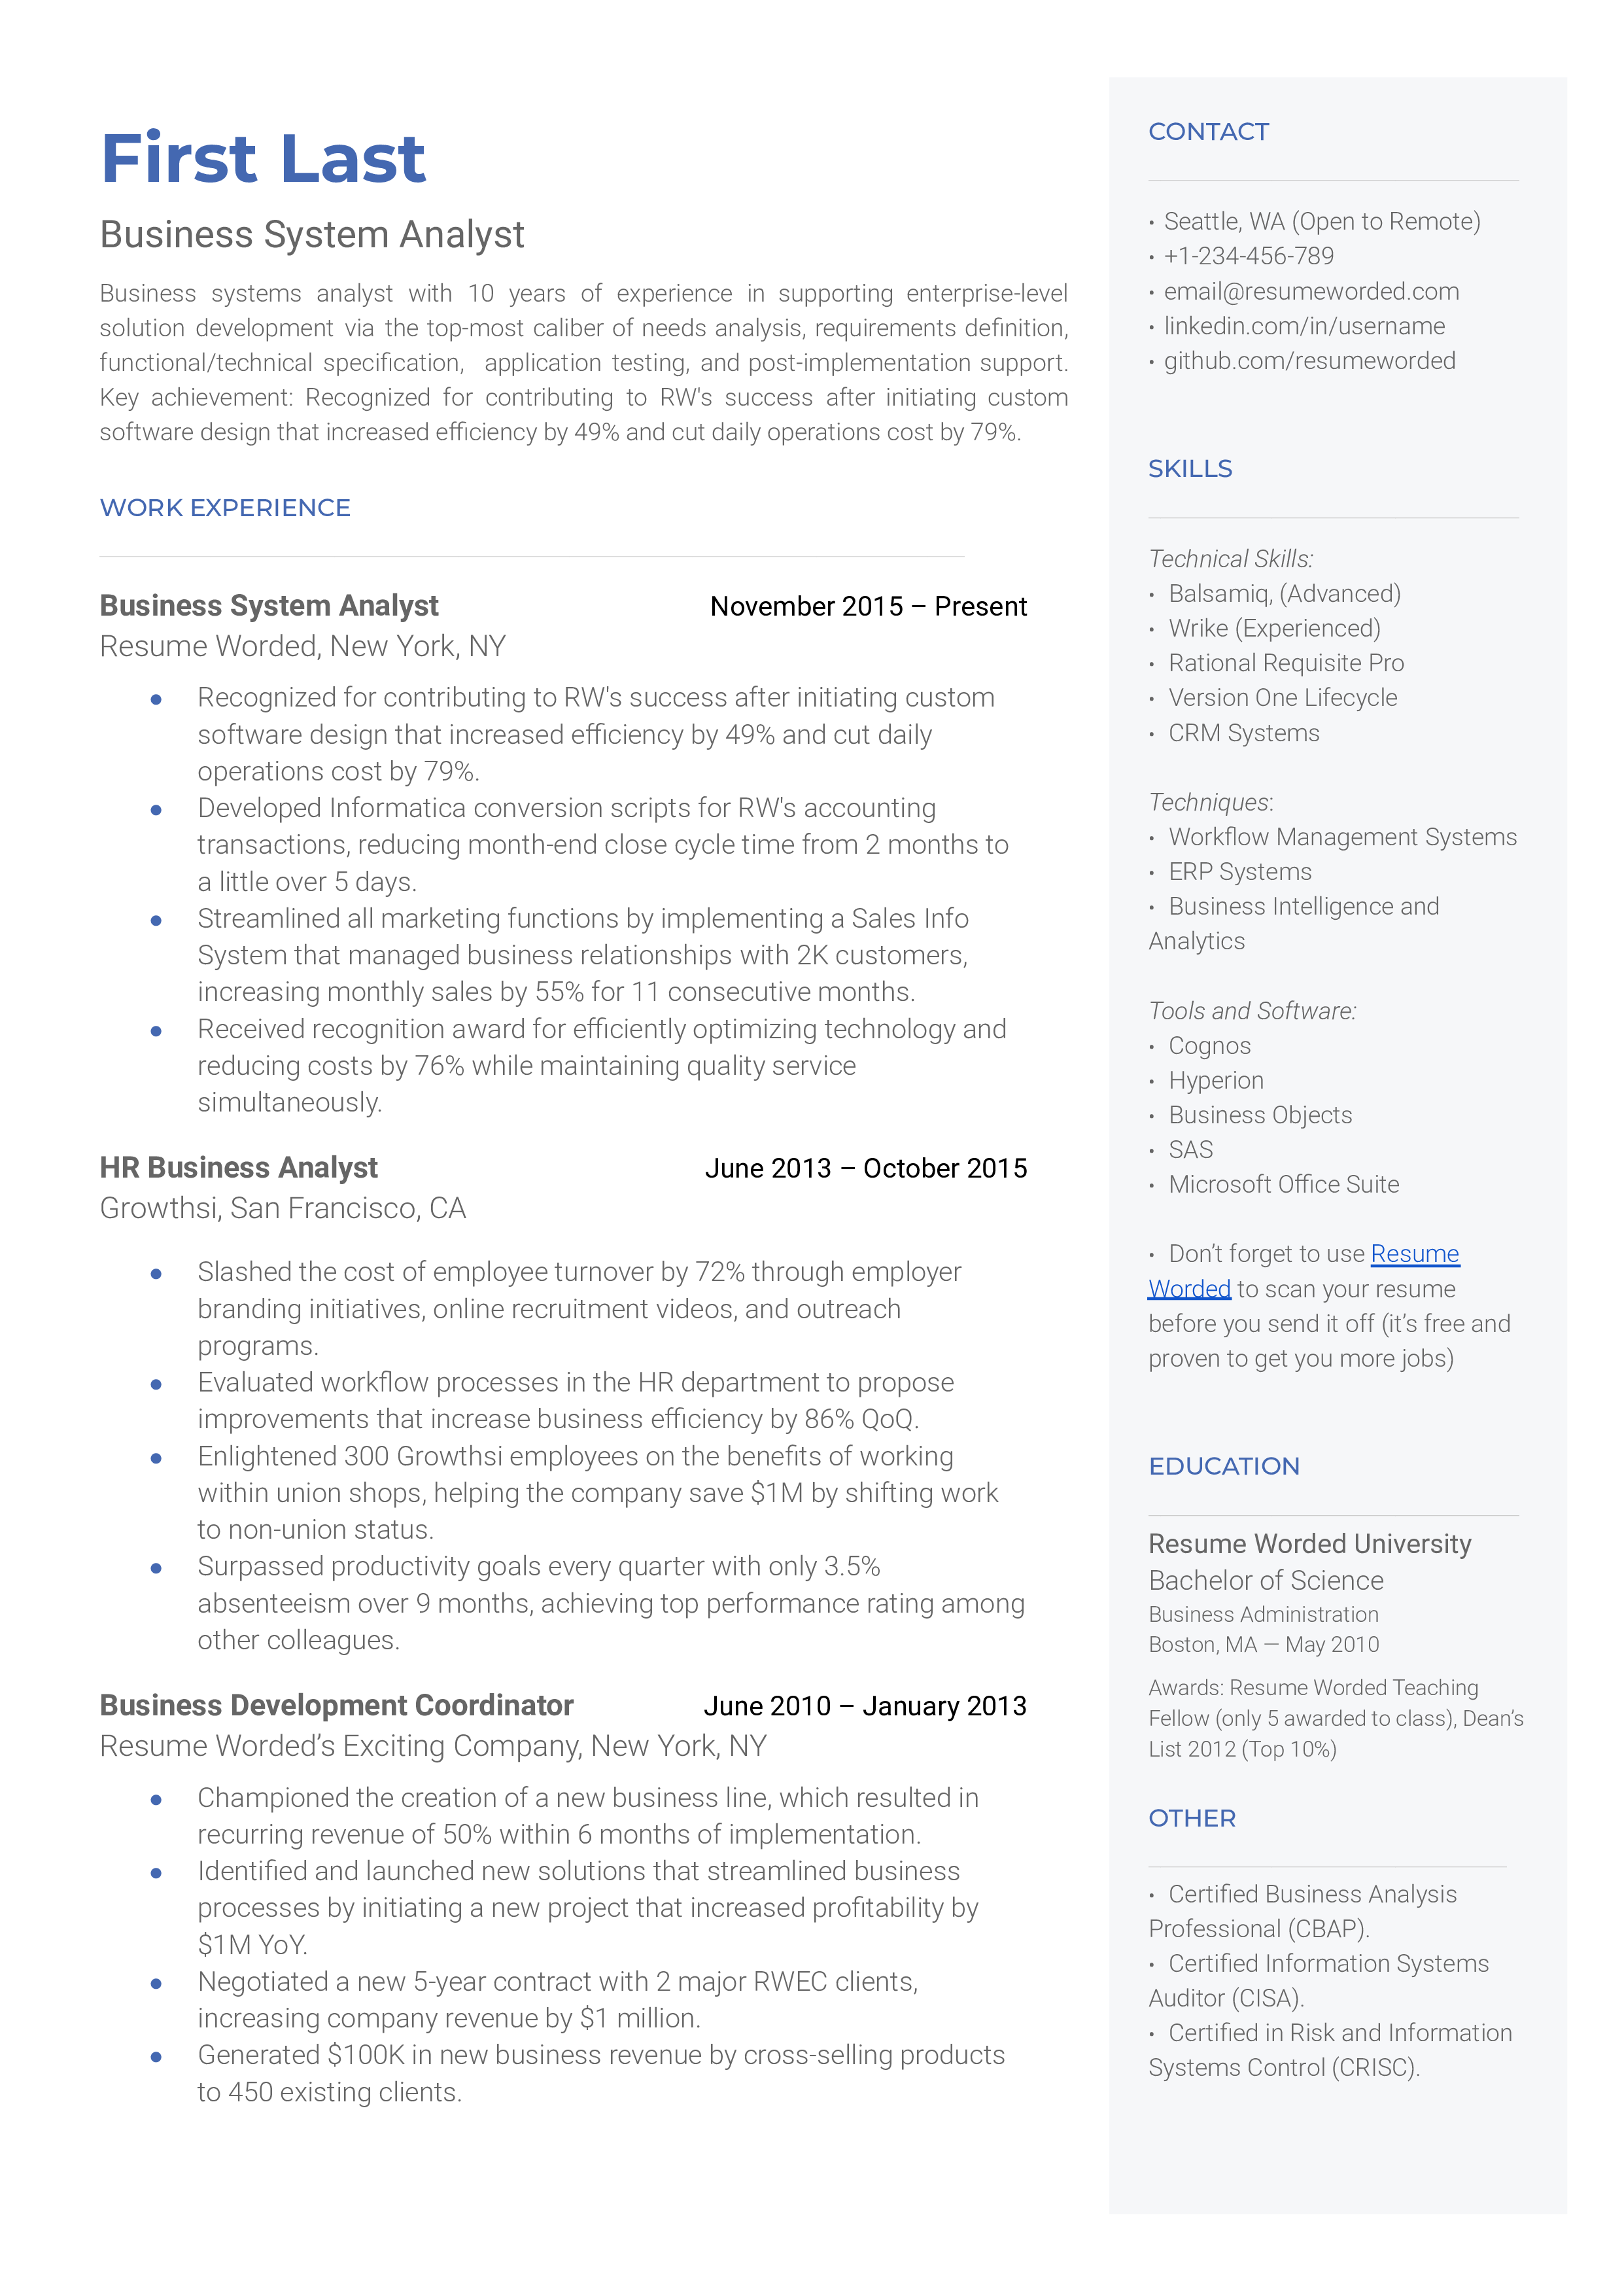 Business System Analyst Resume Sample